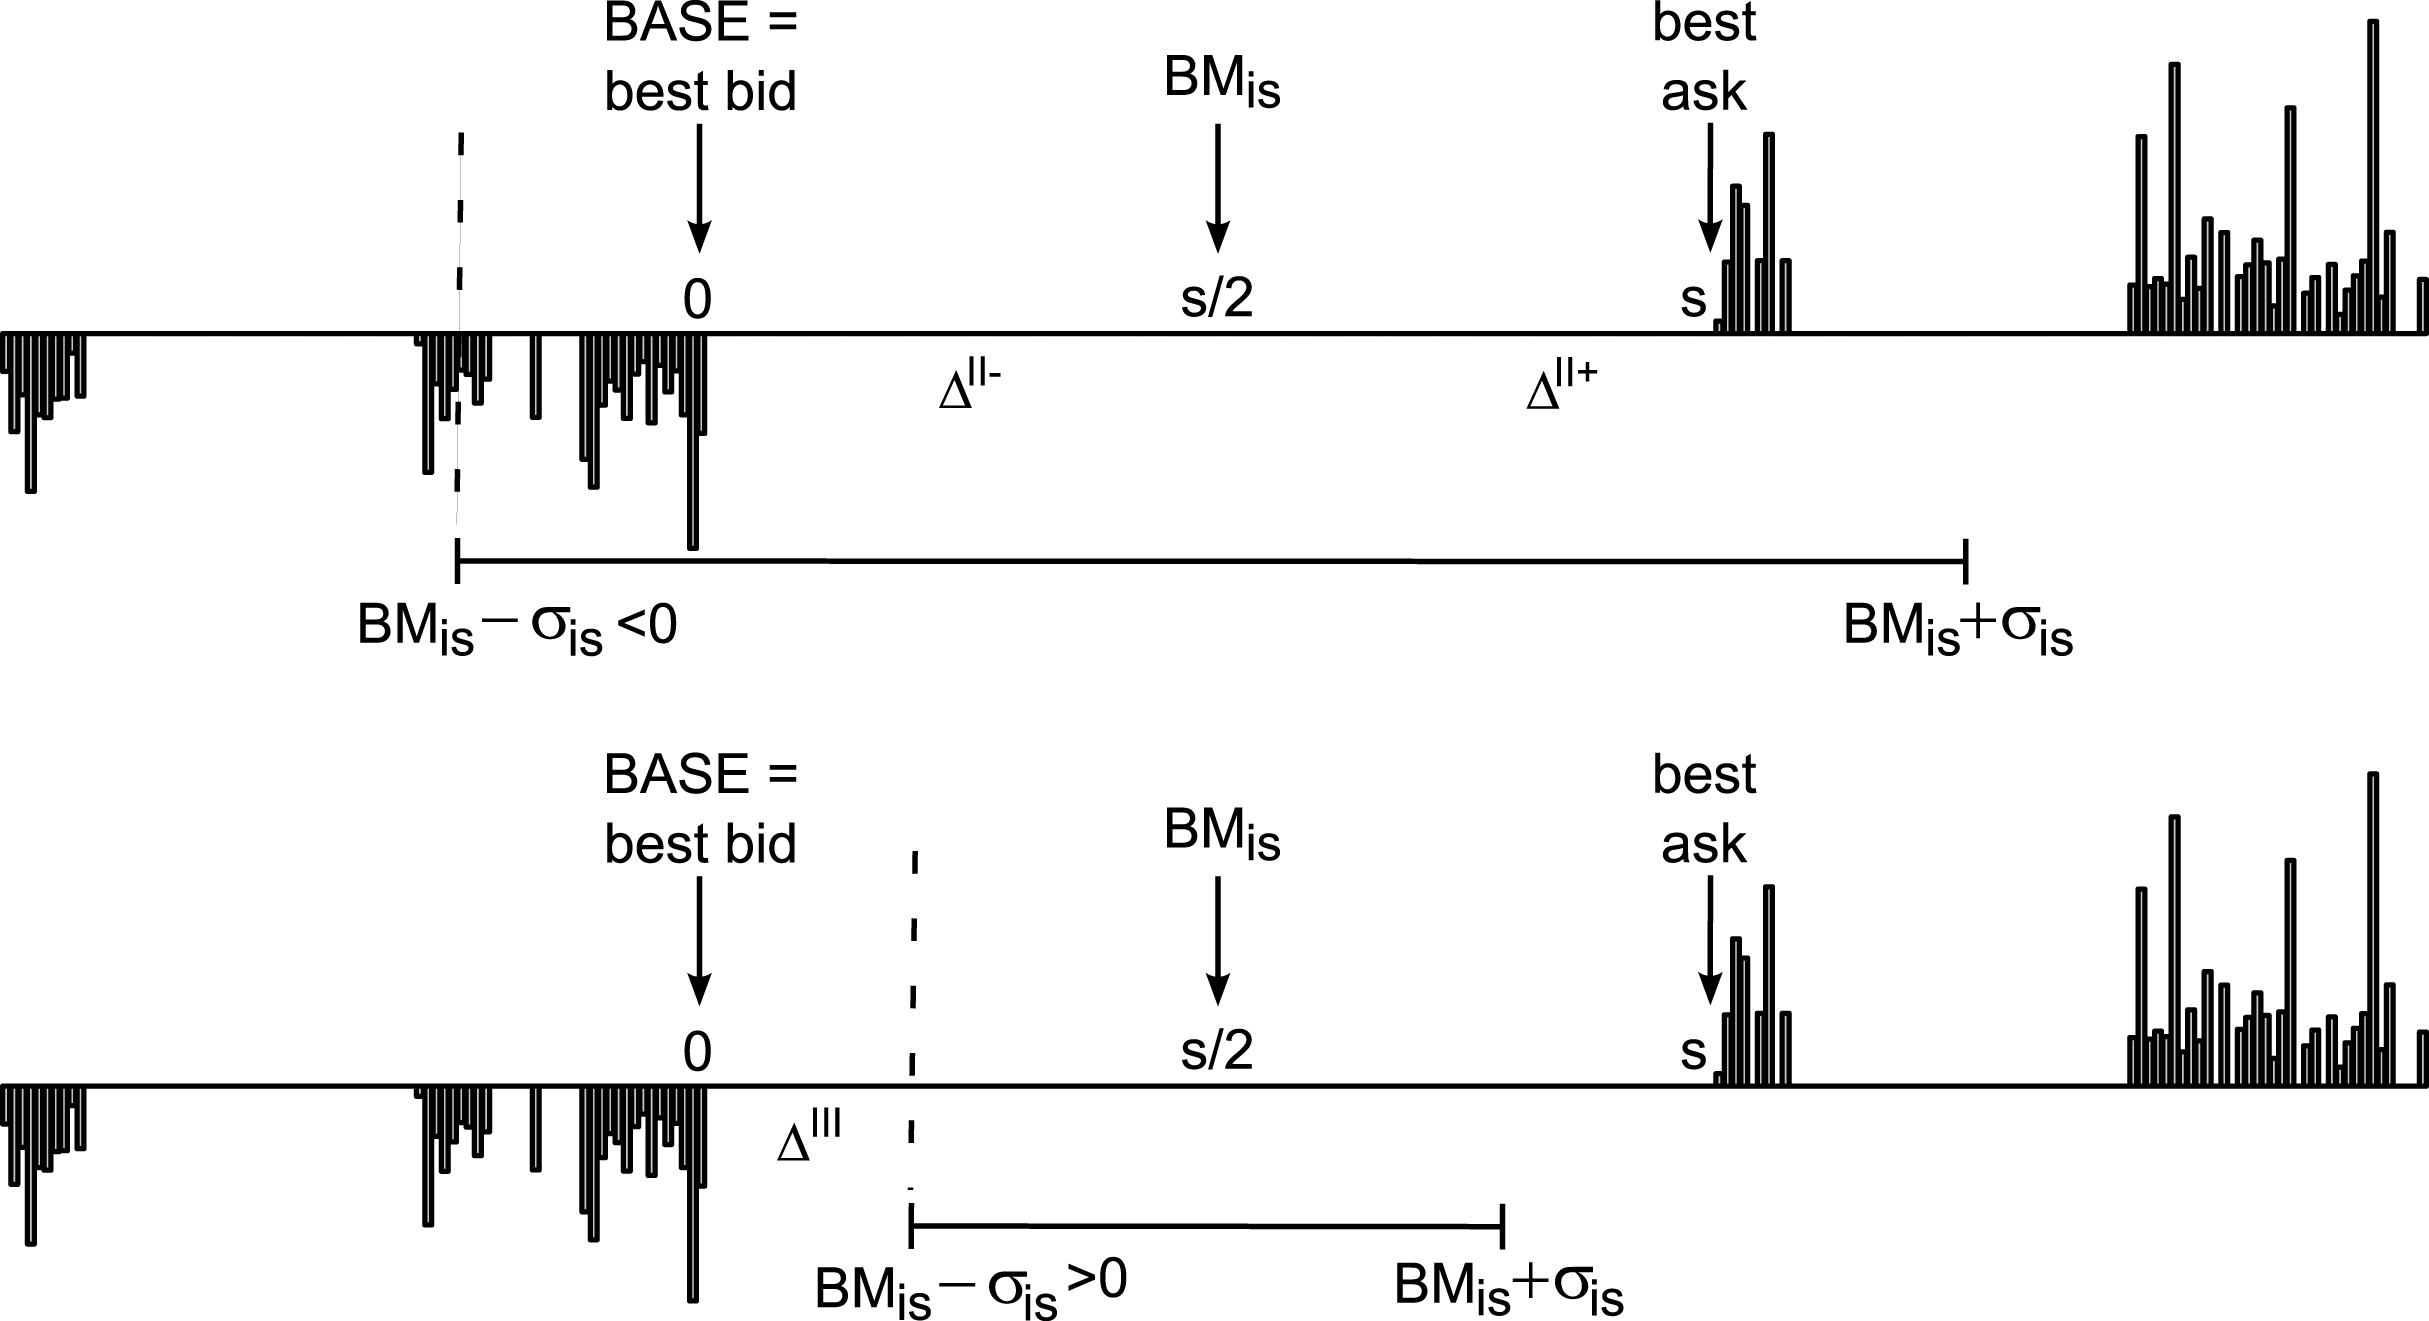 Exemplifying (down-side) volatility bands for sell limit orders. In case when BM

is
 - σ

is
 < 0 or equivalently σ

is
 > s/2 (top), wherever the non-crossing limit order is placed, the execution can’t take place below the minimum boundary of the volatility threshold (the non-crossing limit order assumption means that Δ > 0). However, if Δ < s/2 (Δ

II-) the implementation shortfall is positive corresponding to a negative price change, while if Δ > s/2 (Δ

II+) the implementation shortfall is negative standing for a more favorable execution. If BM

is
 - σ

is
 > 0 or equivalently σ

is
 < s/2 (bottom), a special case arises when Δ < BM

is
 - σ

is
 (Δ

III
). This unfavorable type of execution is penalized as described in Equation (4).